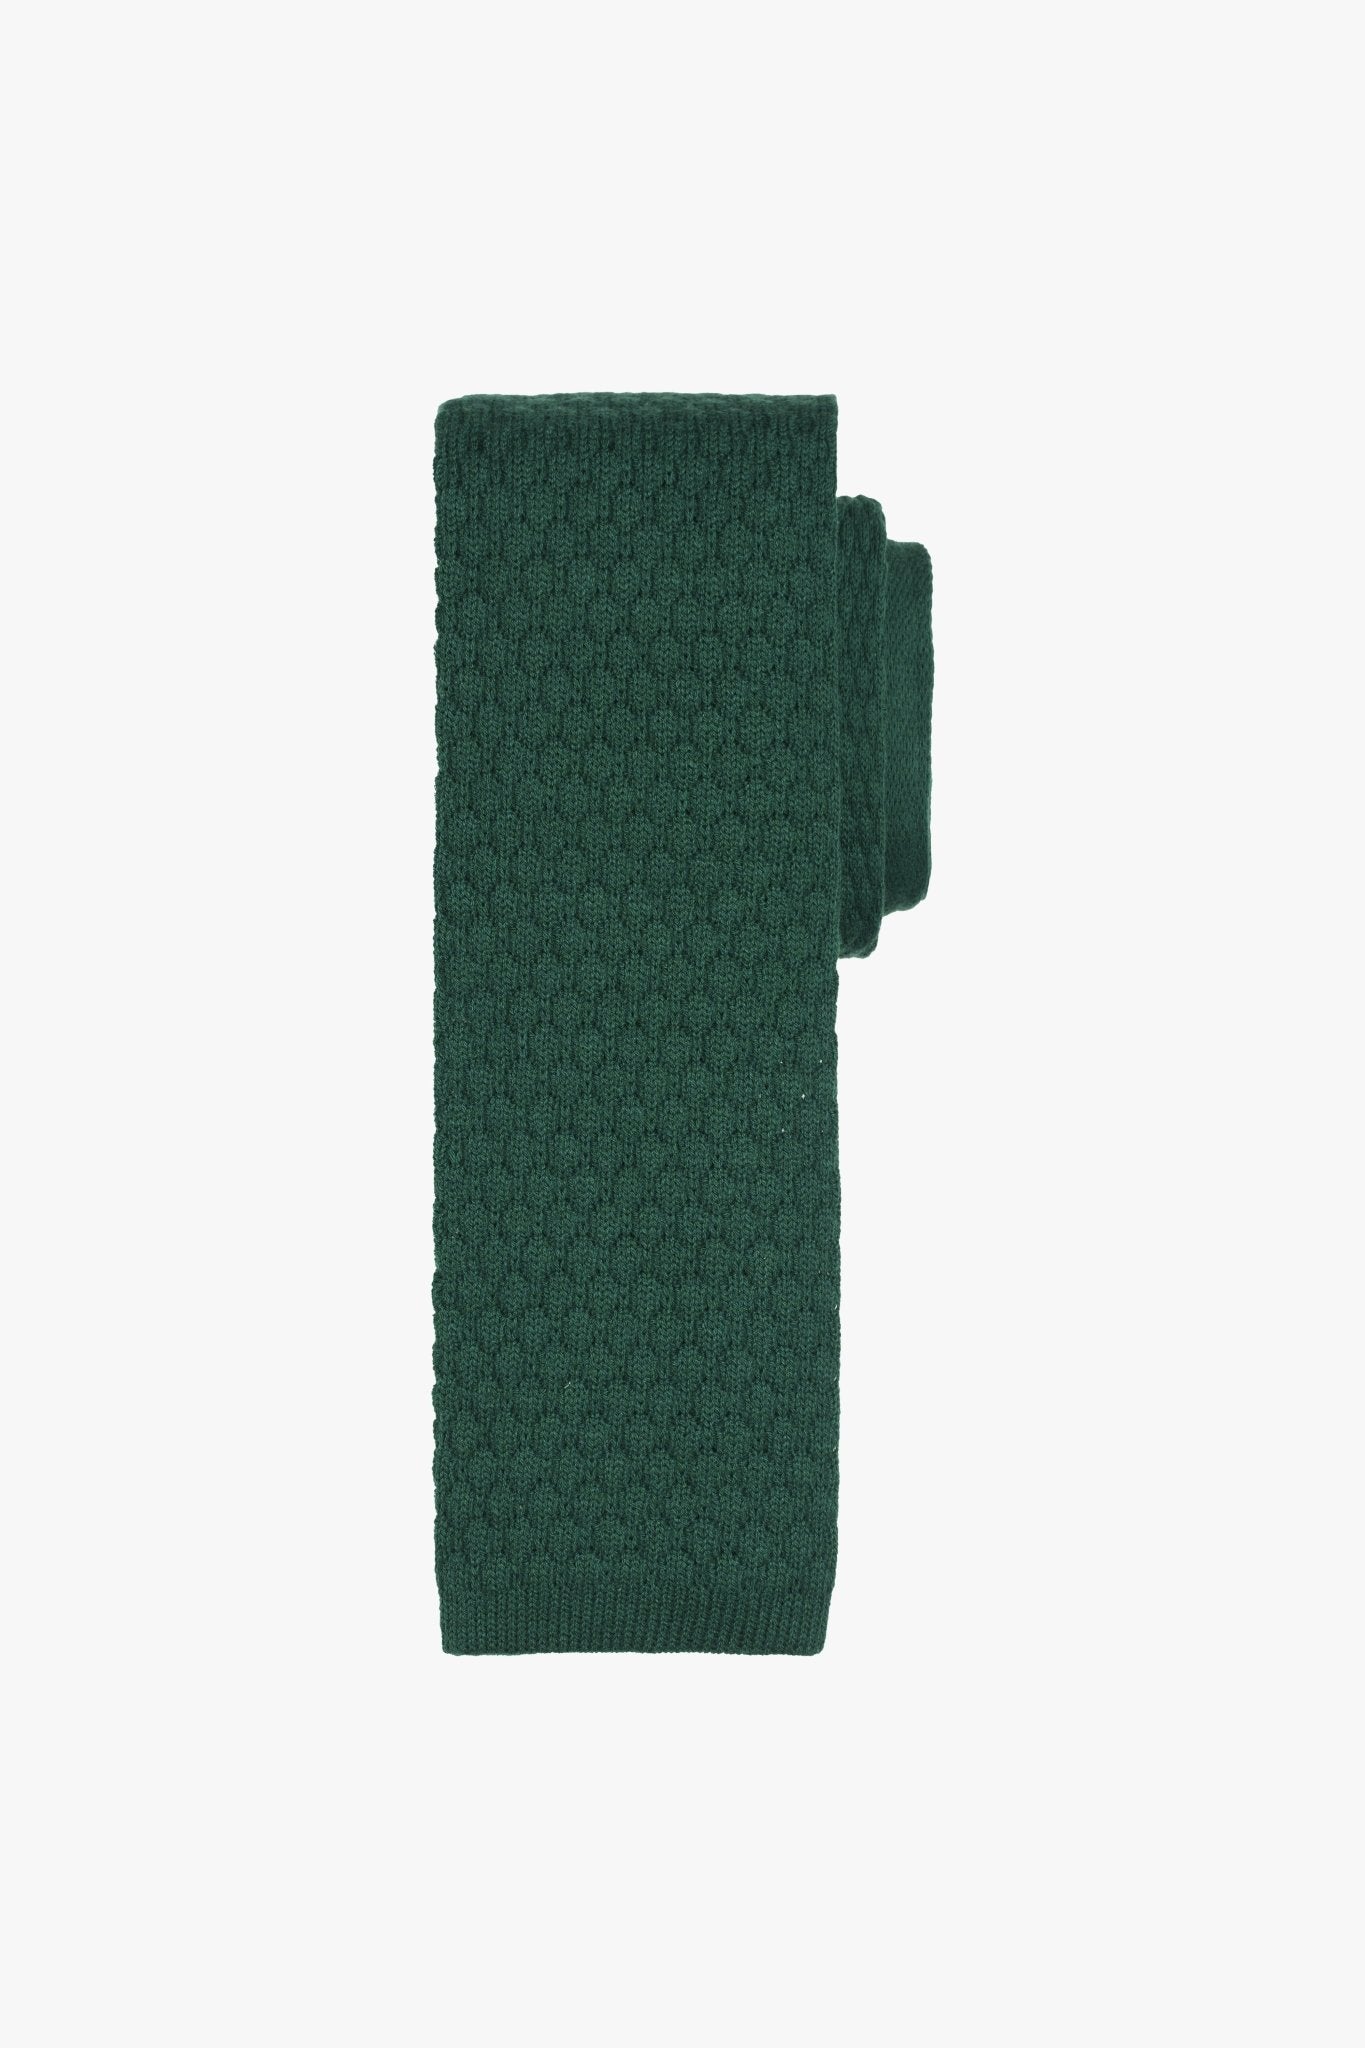 Green Knitted Tie - My Suited Life